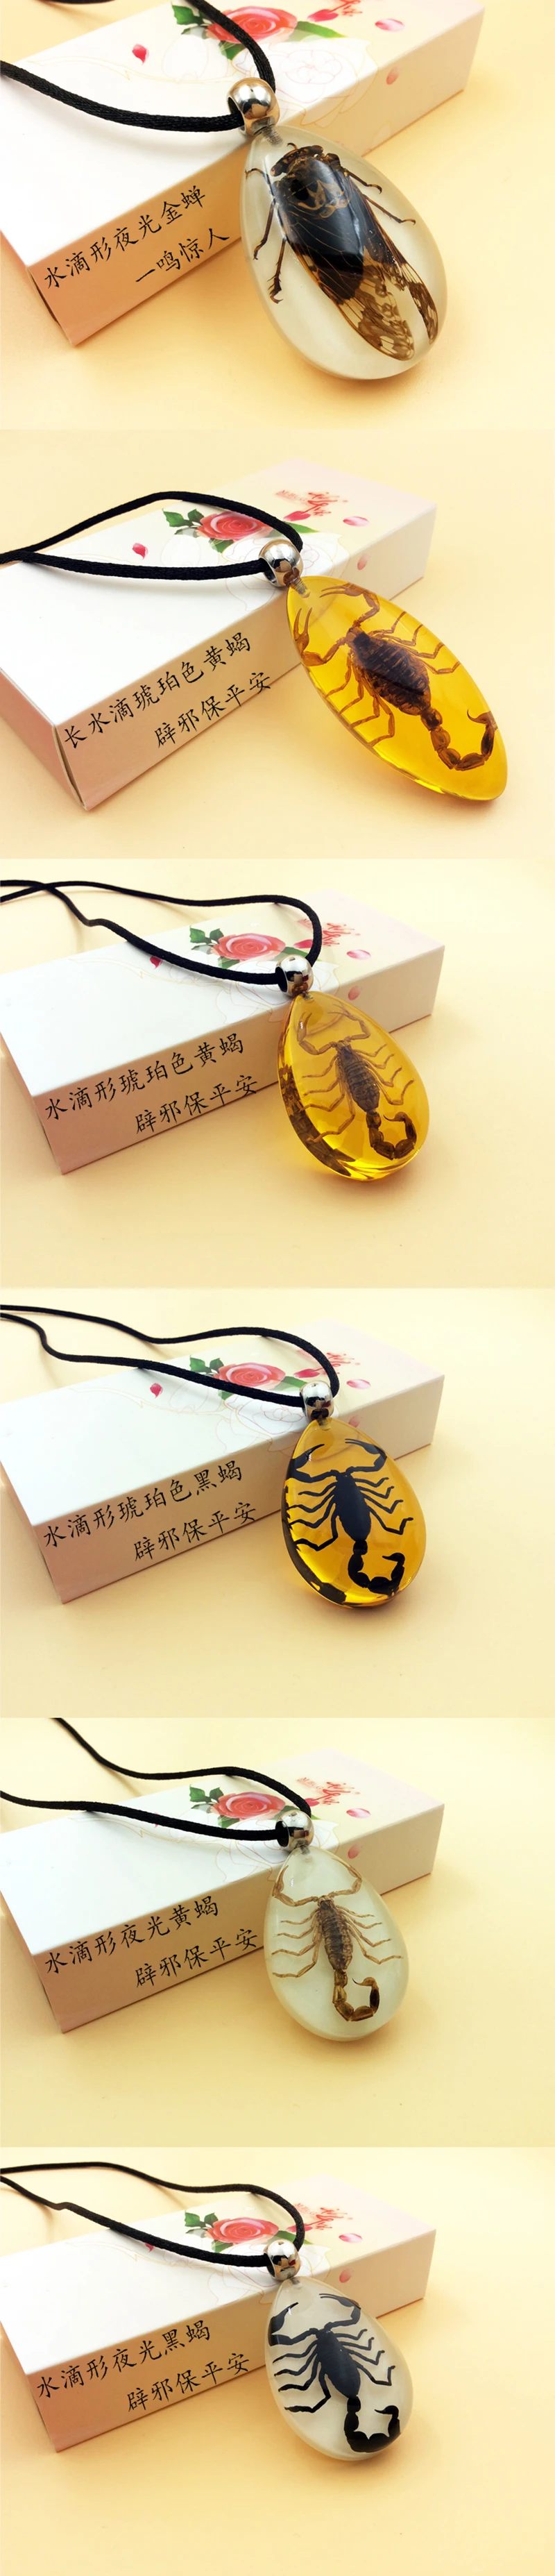 4 pcs Hot Sale Cute Shape Fresh Style Paperweight Insect Specimen